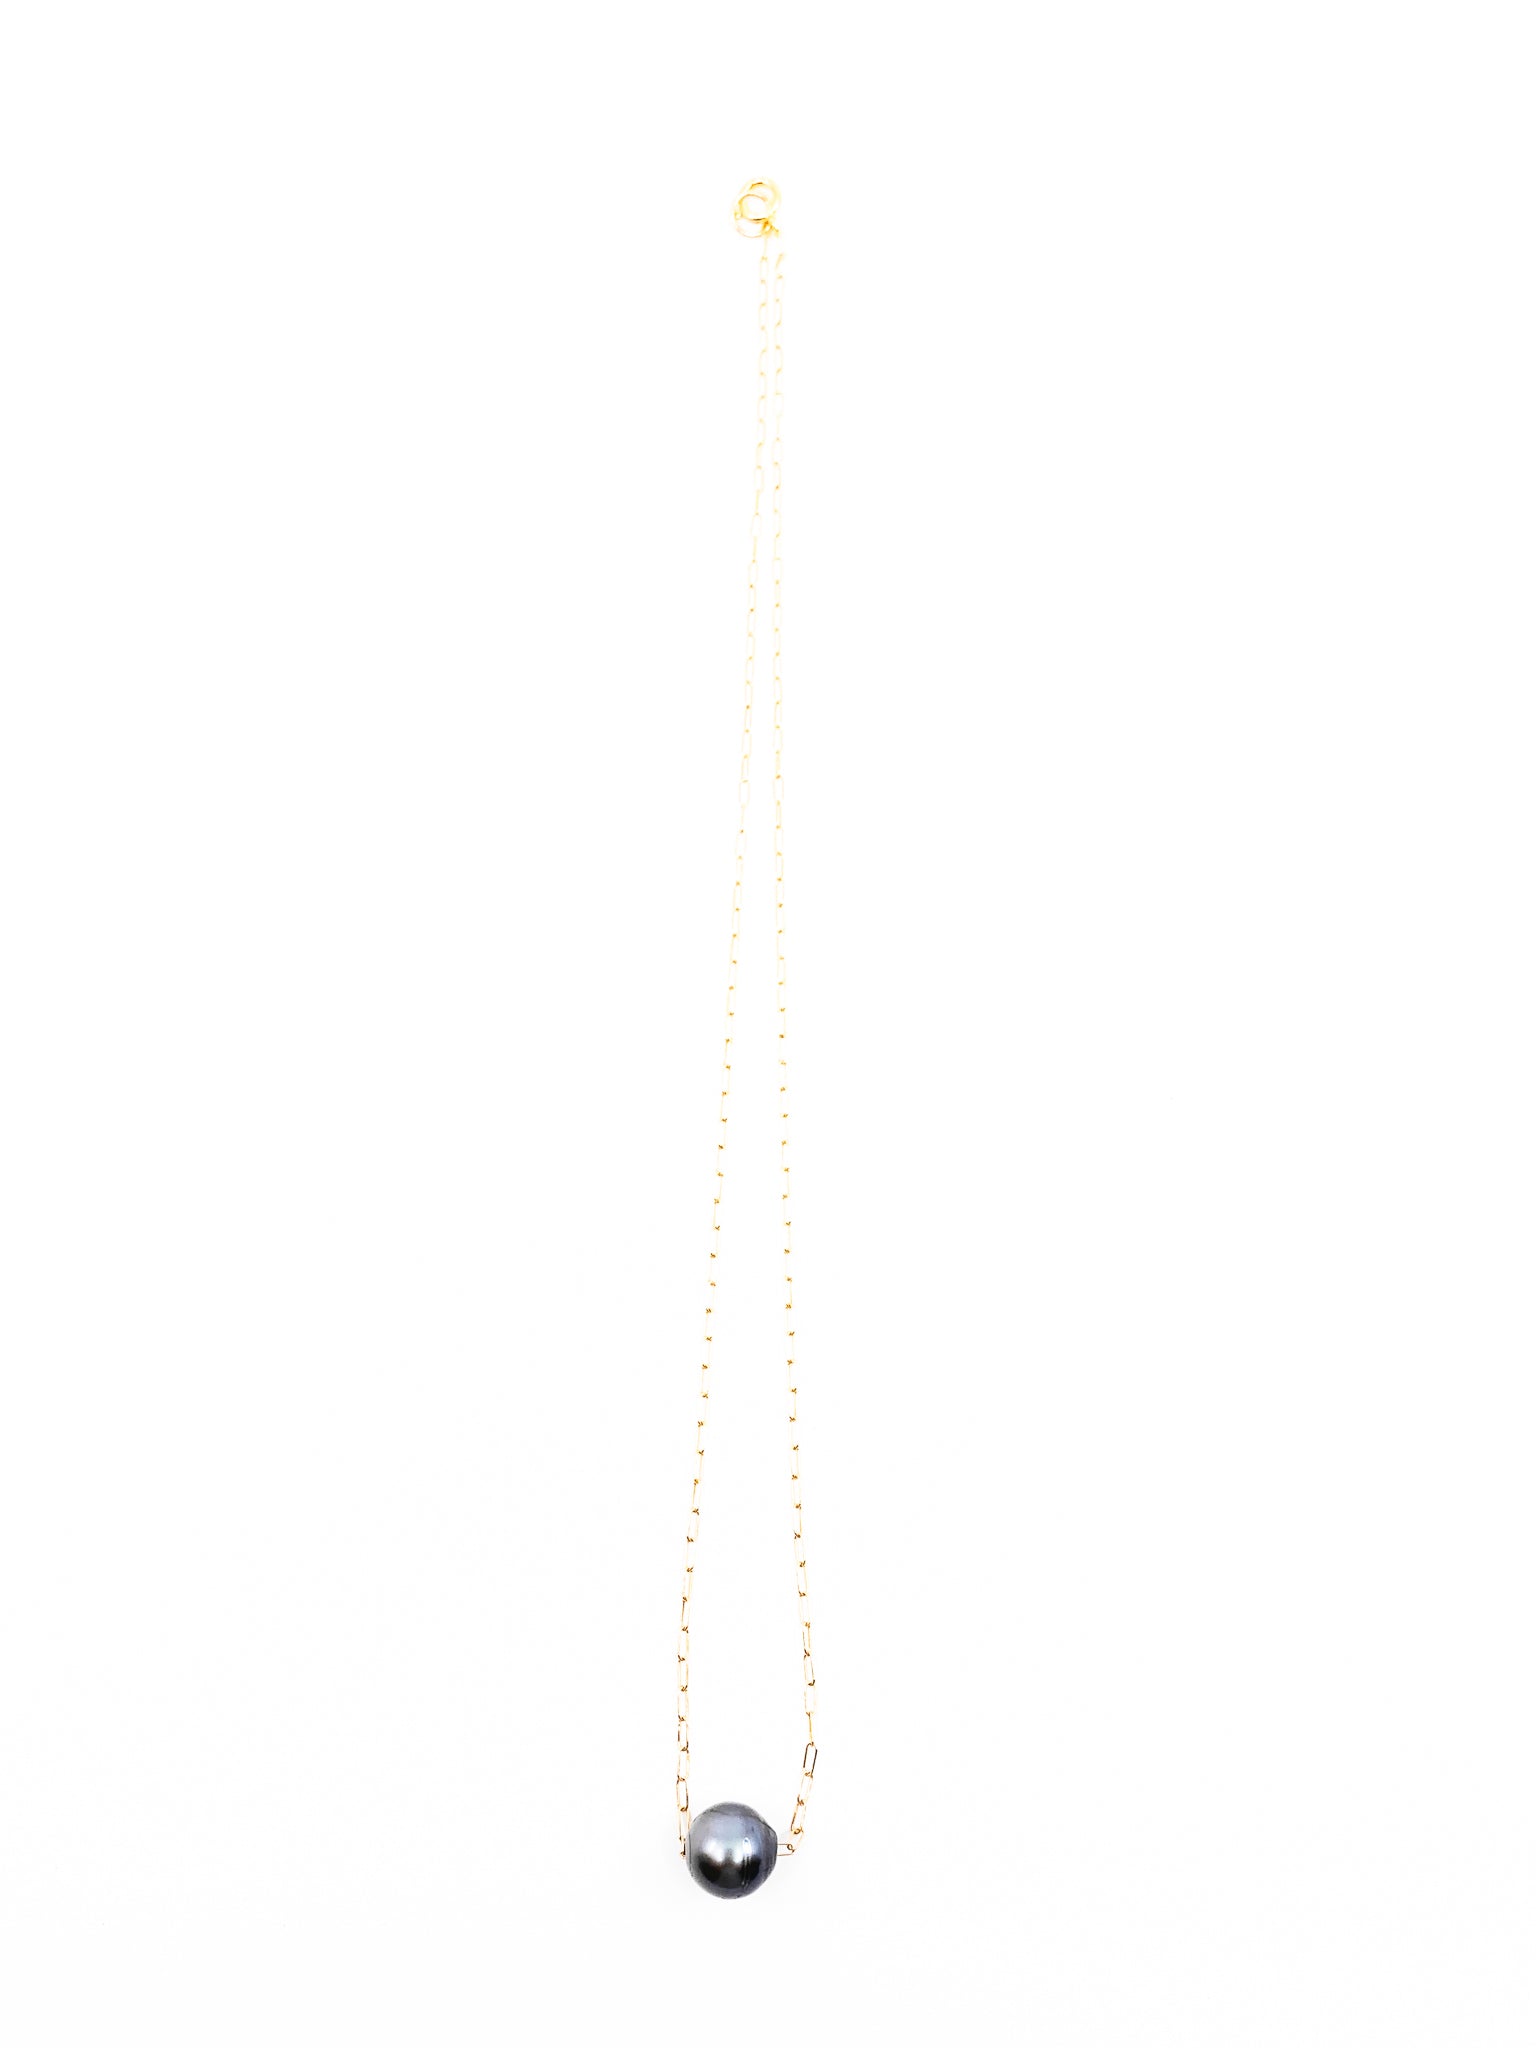 floating tahitian pearl gold chain necklace by eve black jewelry made in hawaii